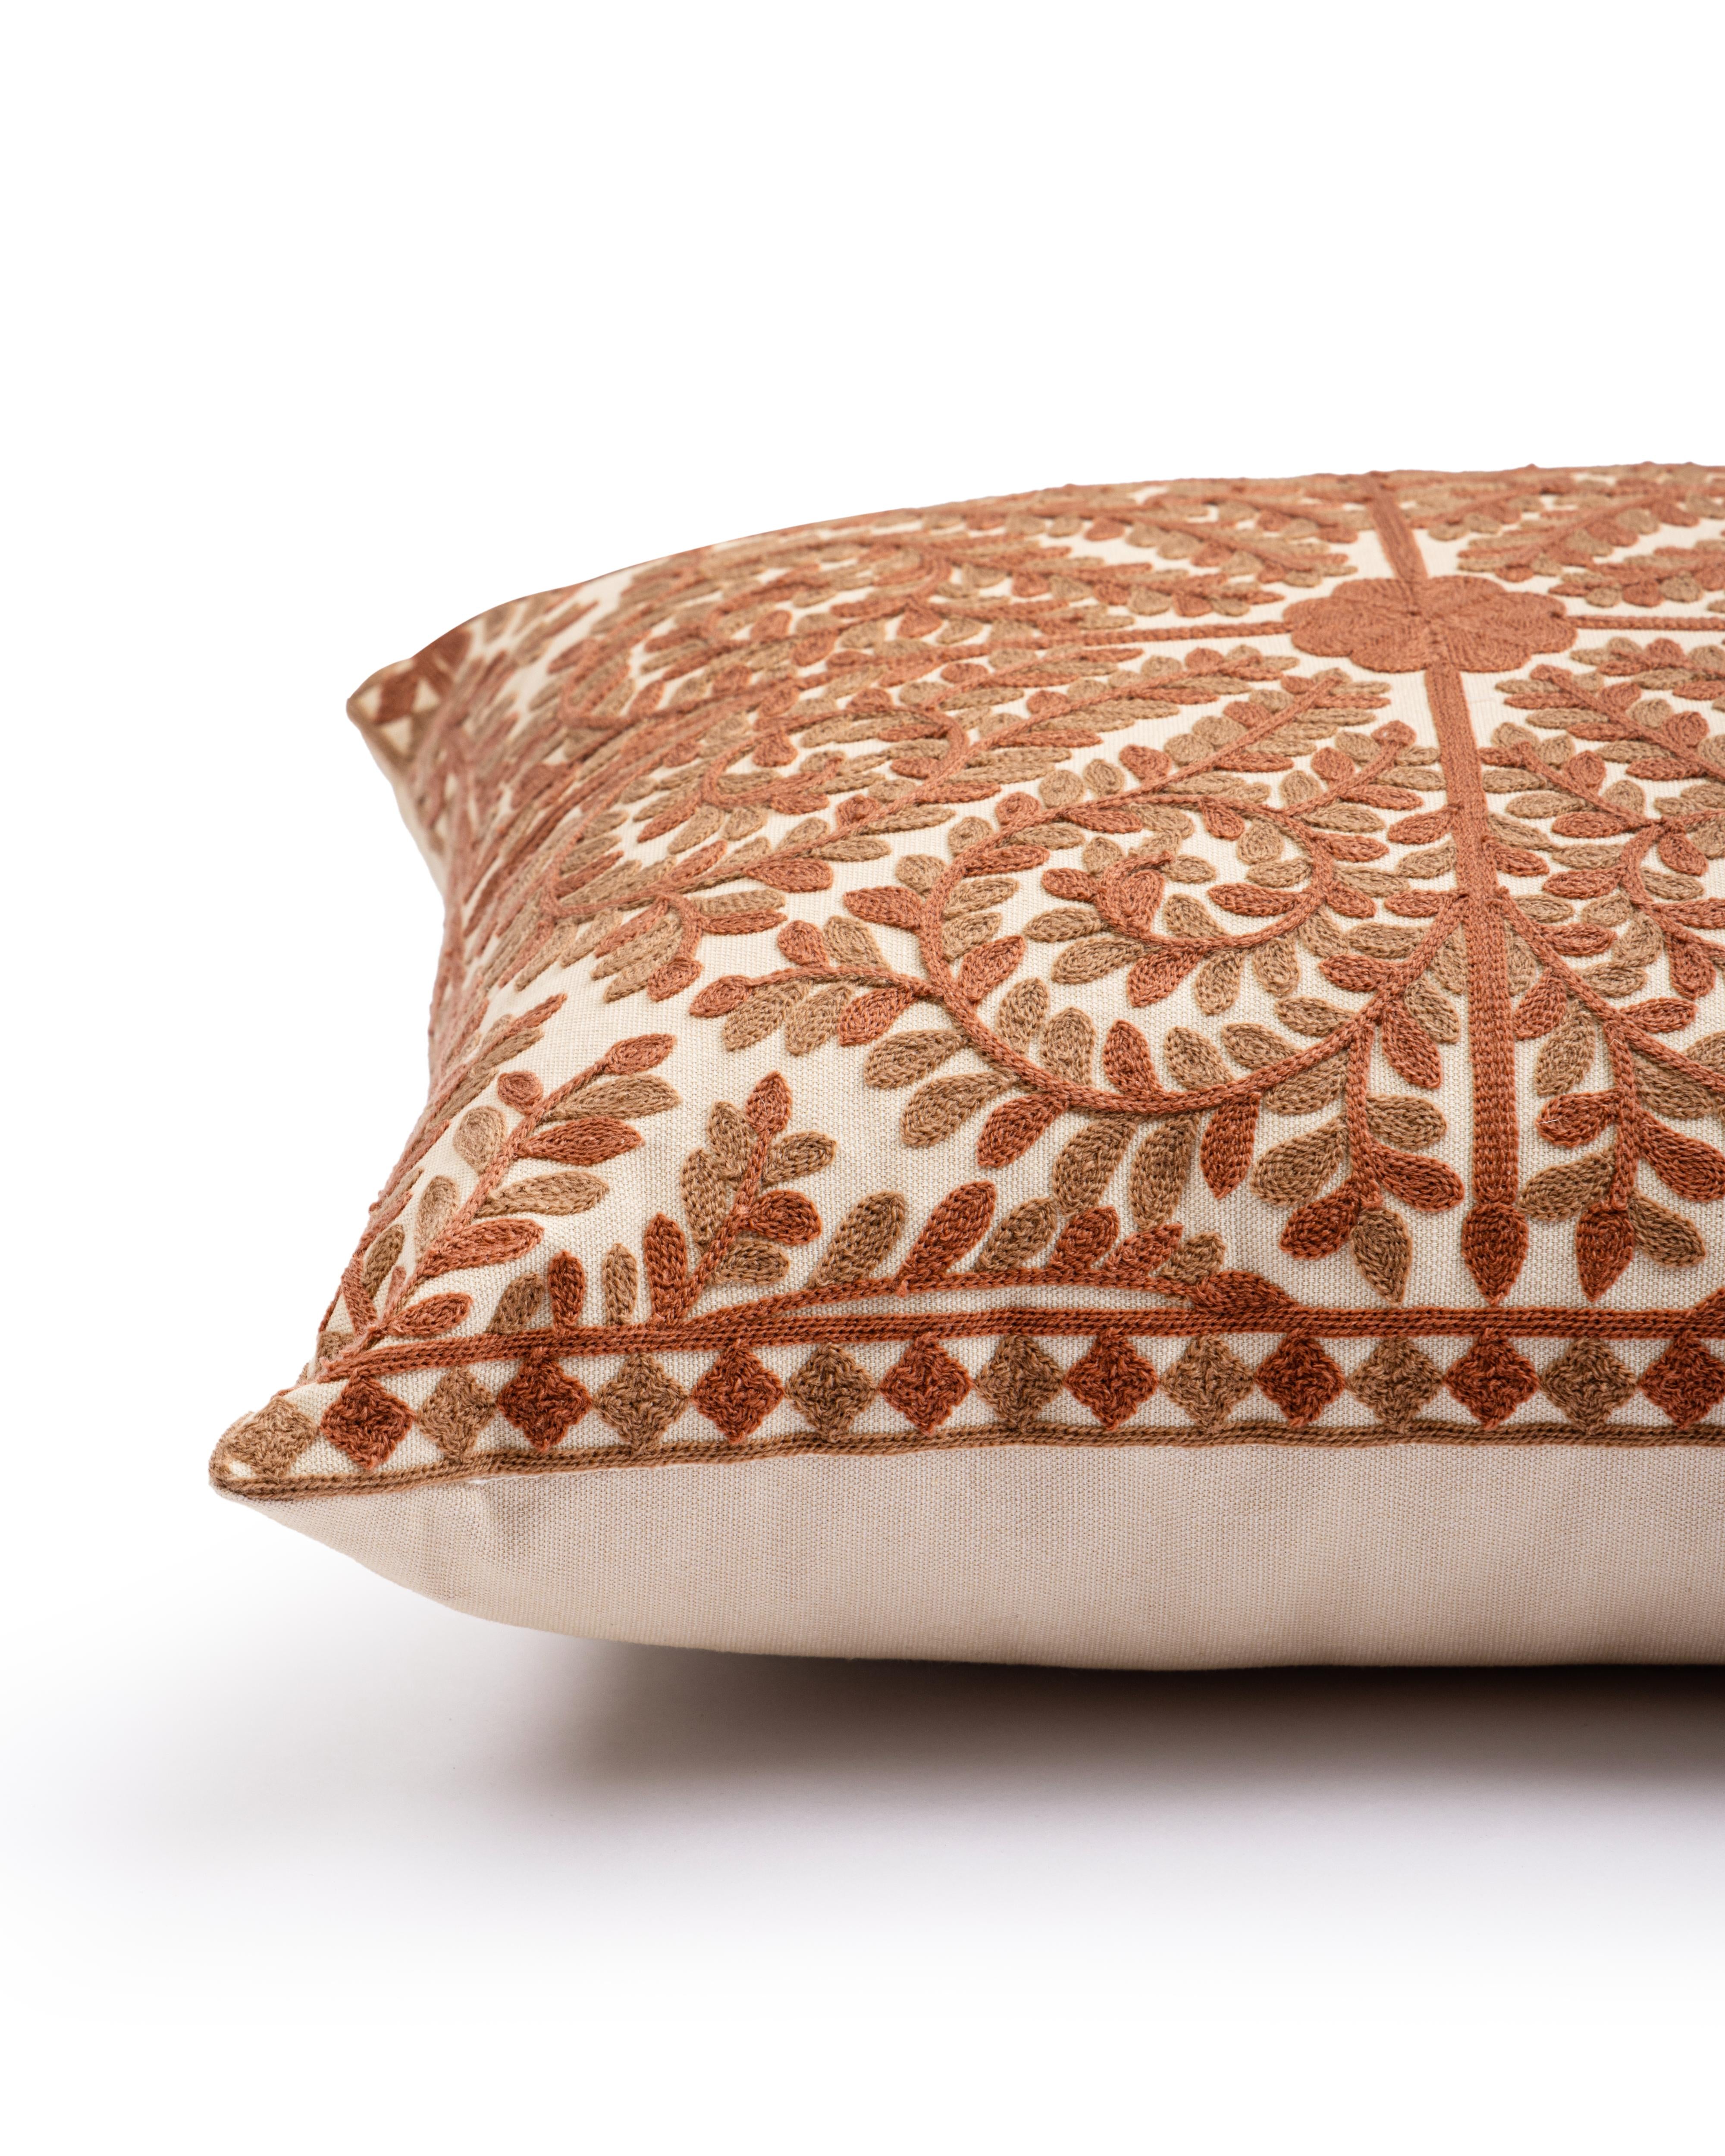 Suzani Pillow | Red Pillow Cover Foliage 18x18" | Made in Jaipur